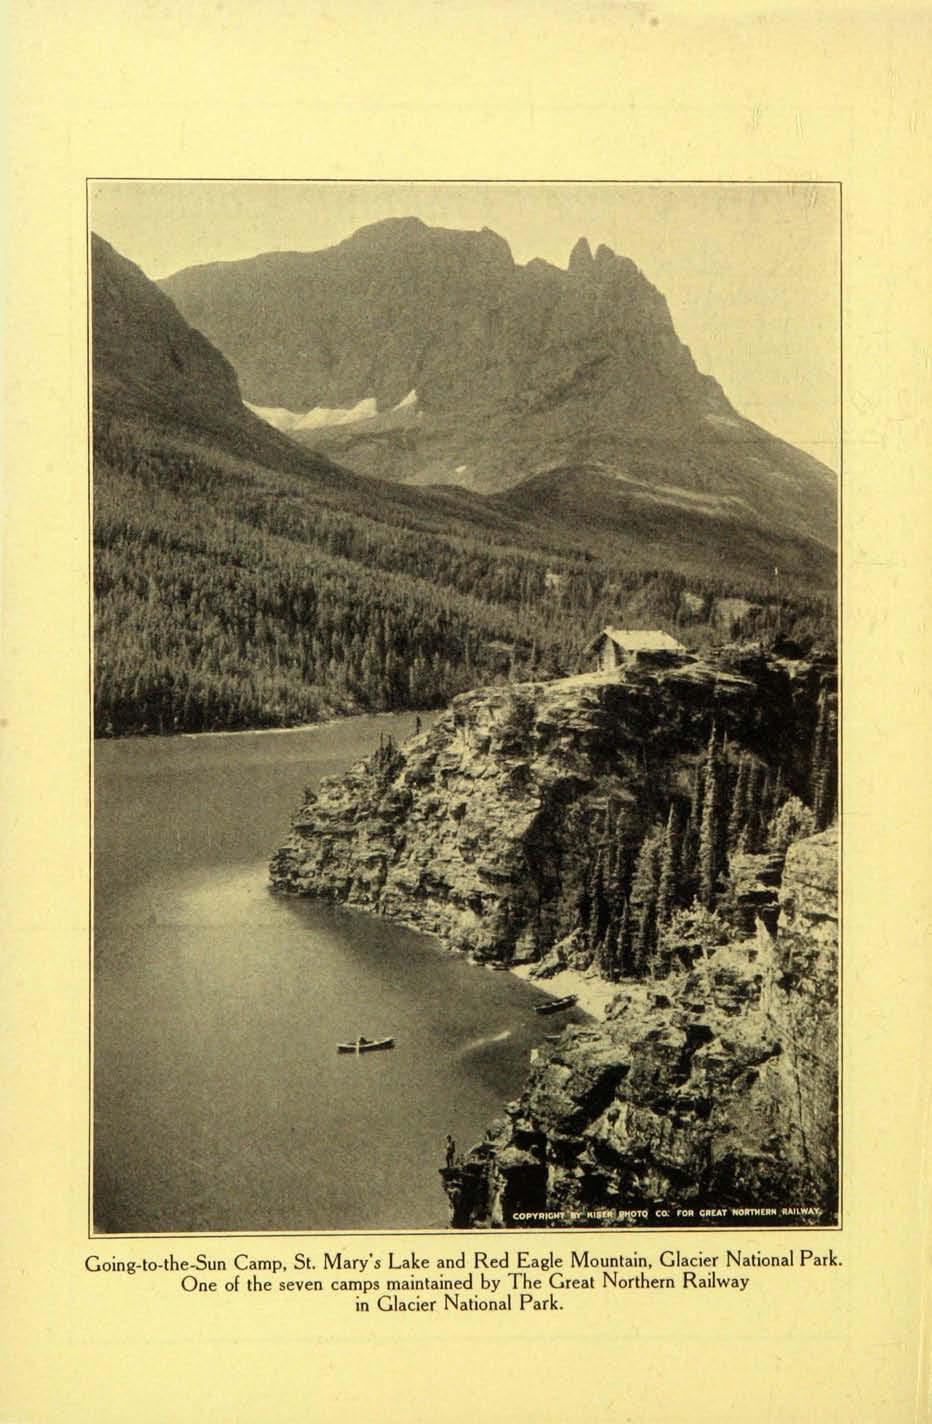 Going-to-the-Sun Camp, St. Mary's Lake and Red Eagle Mountain, Glacier National Park.